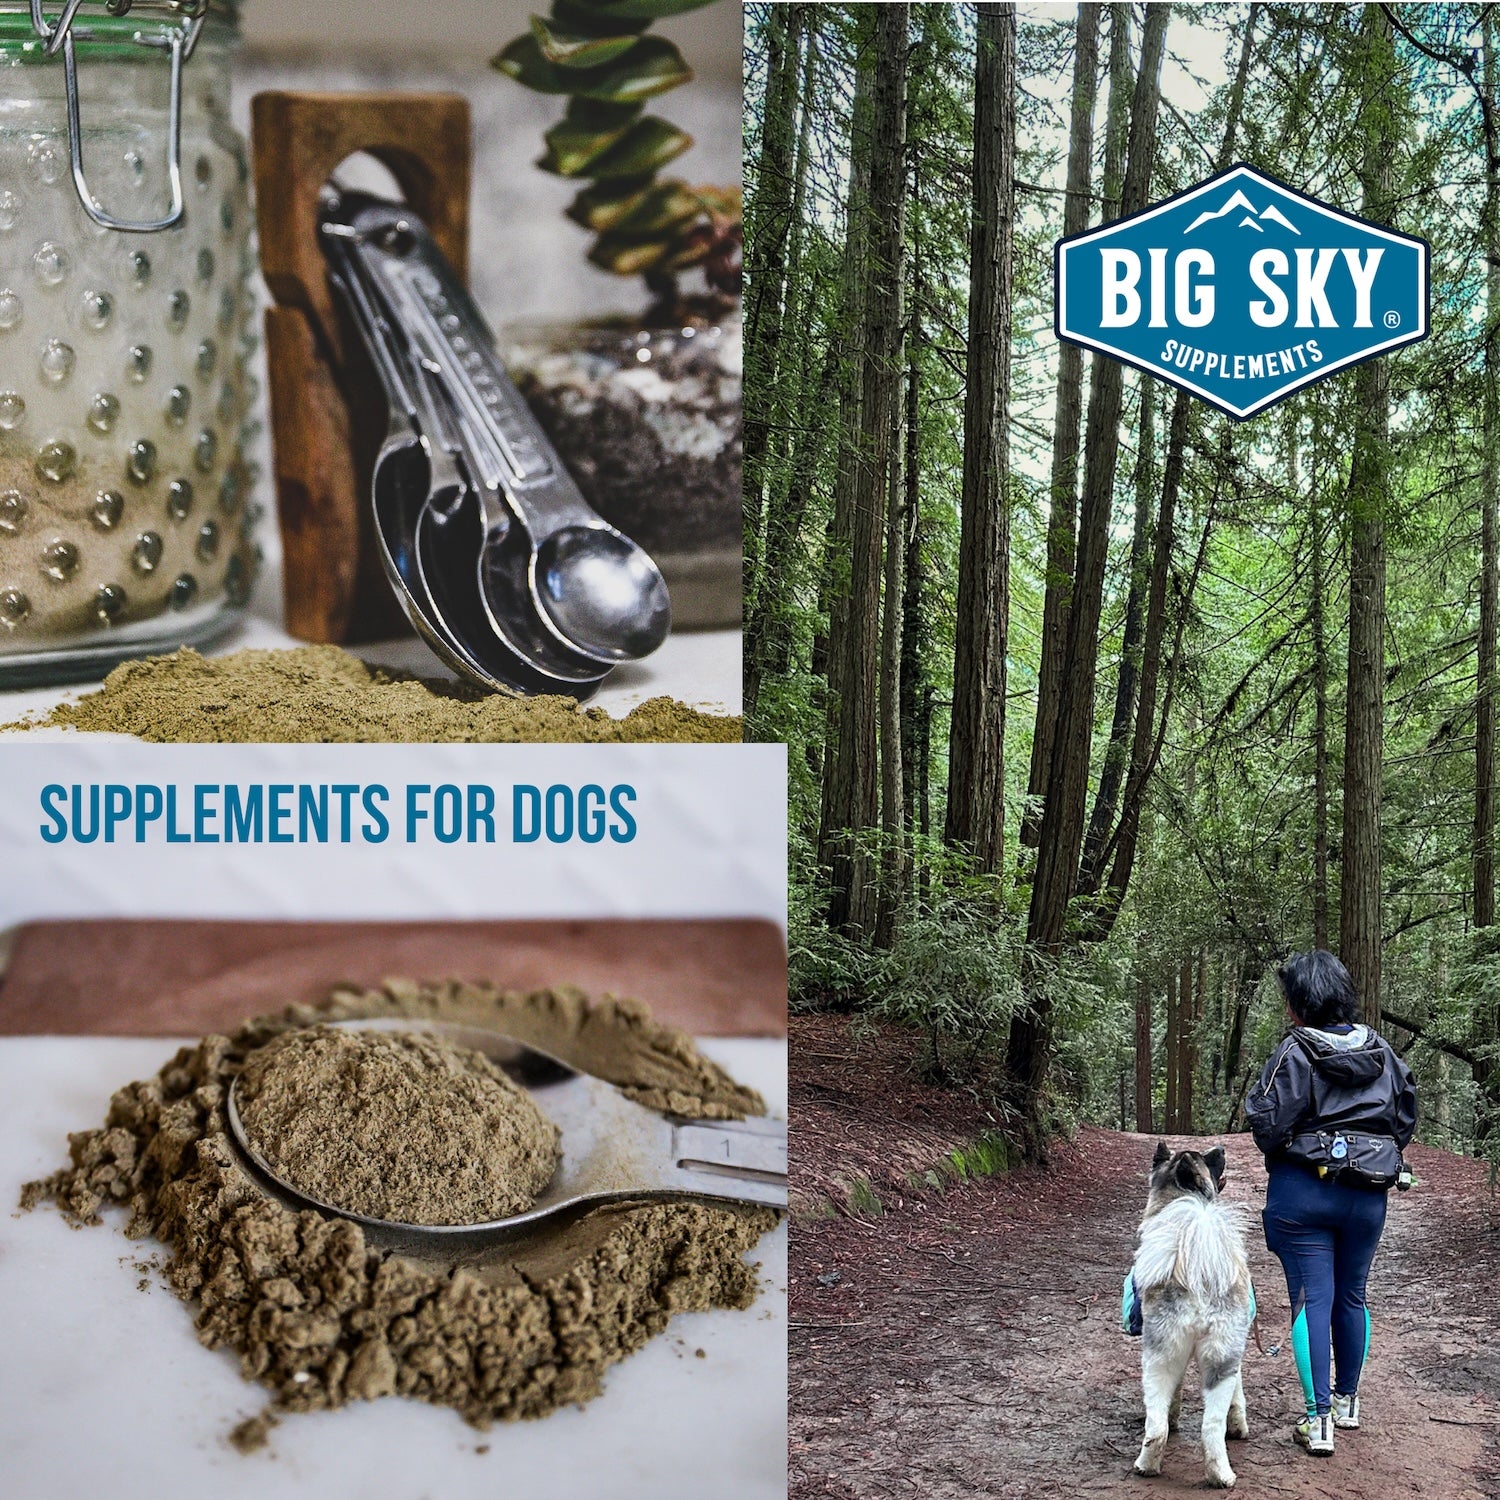 Big Sky Supplements - Herb Mixes for Dogs